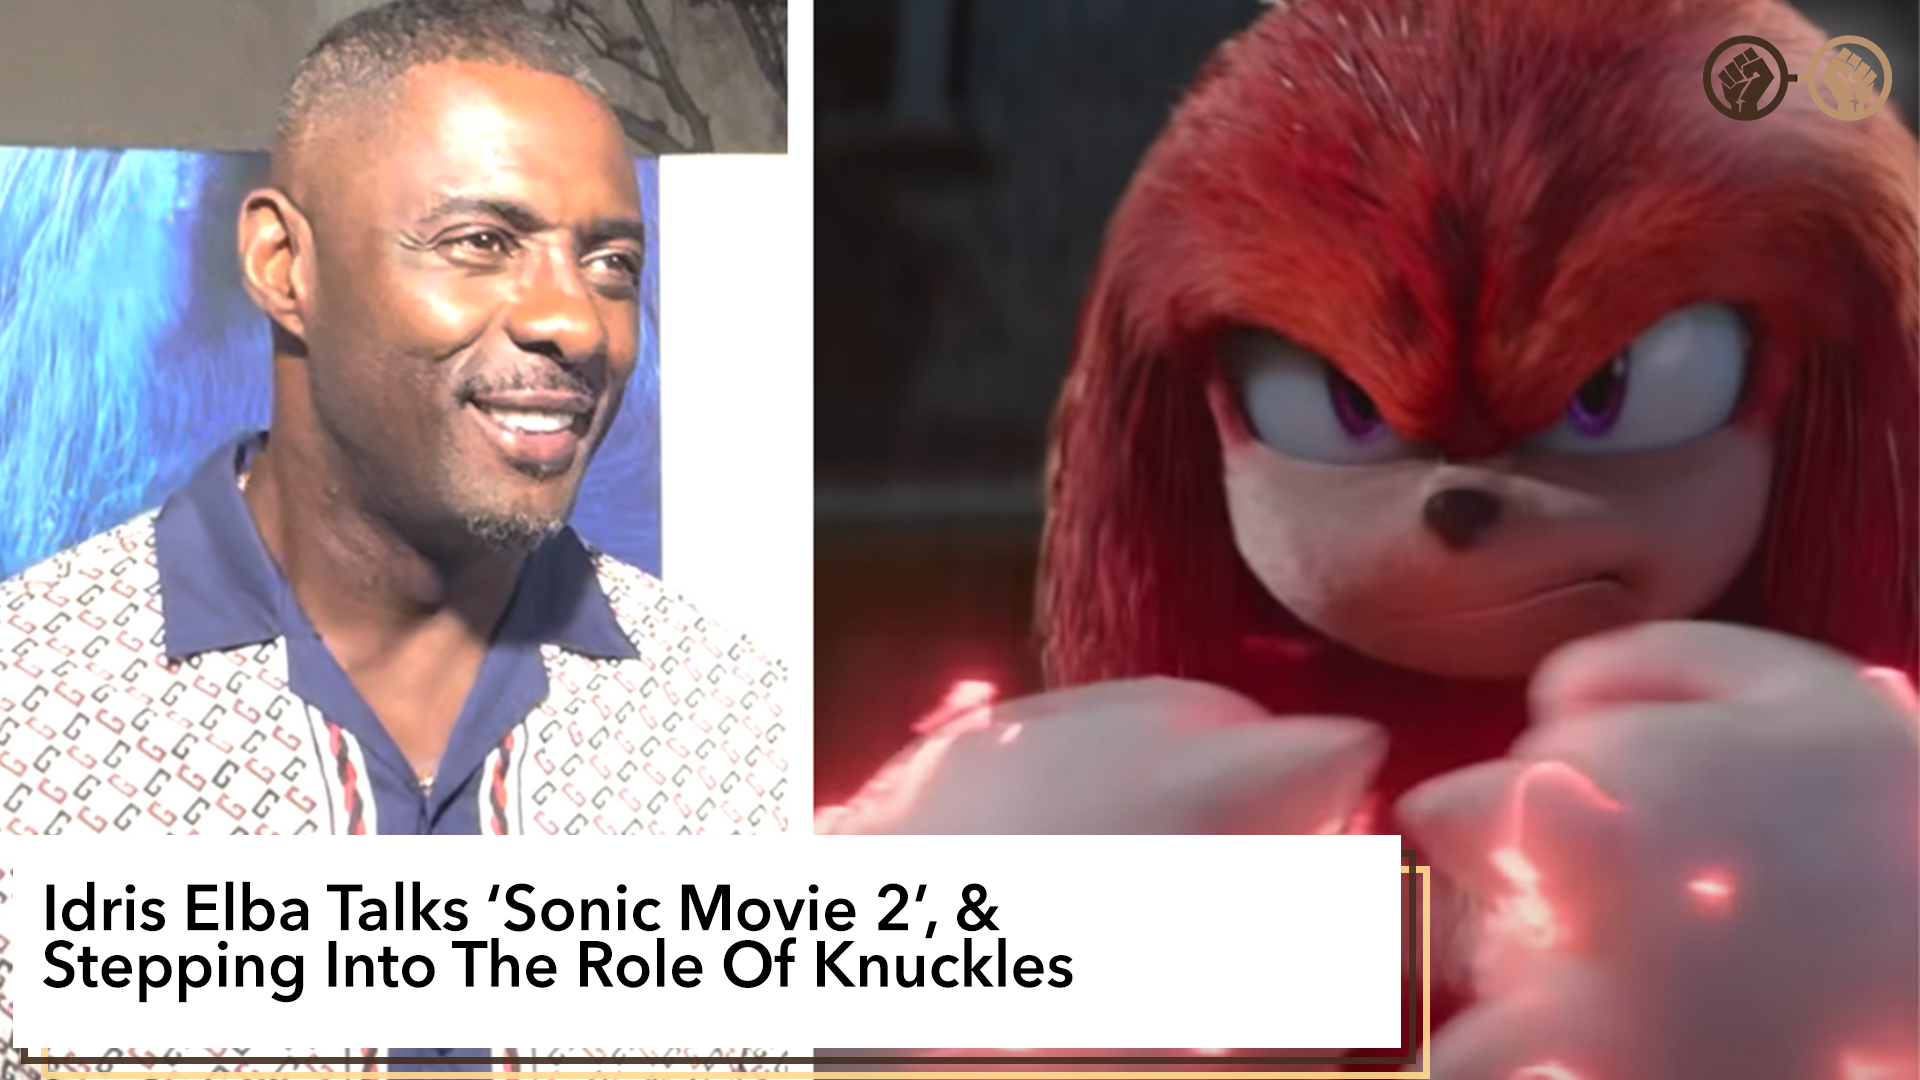 Interview: Idris Elba Talks ‘Sonic Movie 2’, Stepping Into The Role Of Knuckles & Potential Spin-off Show